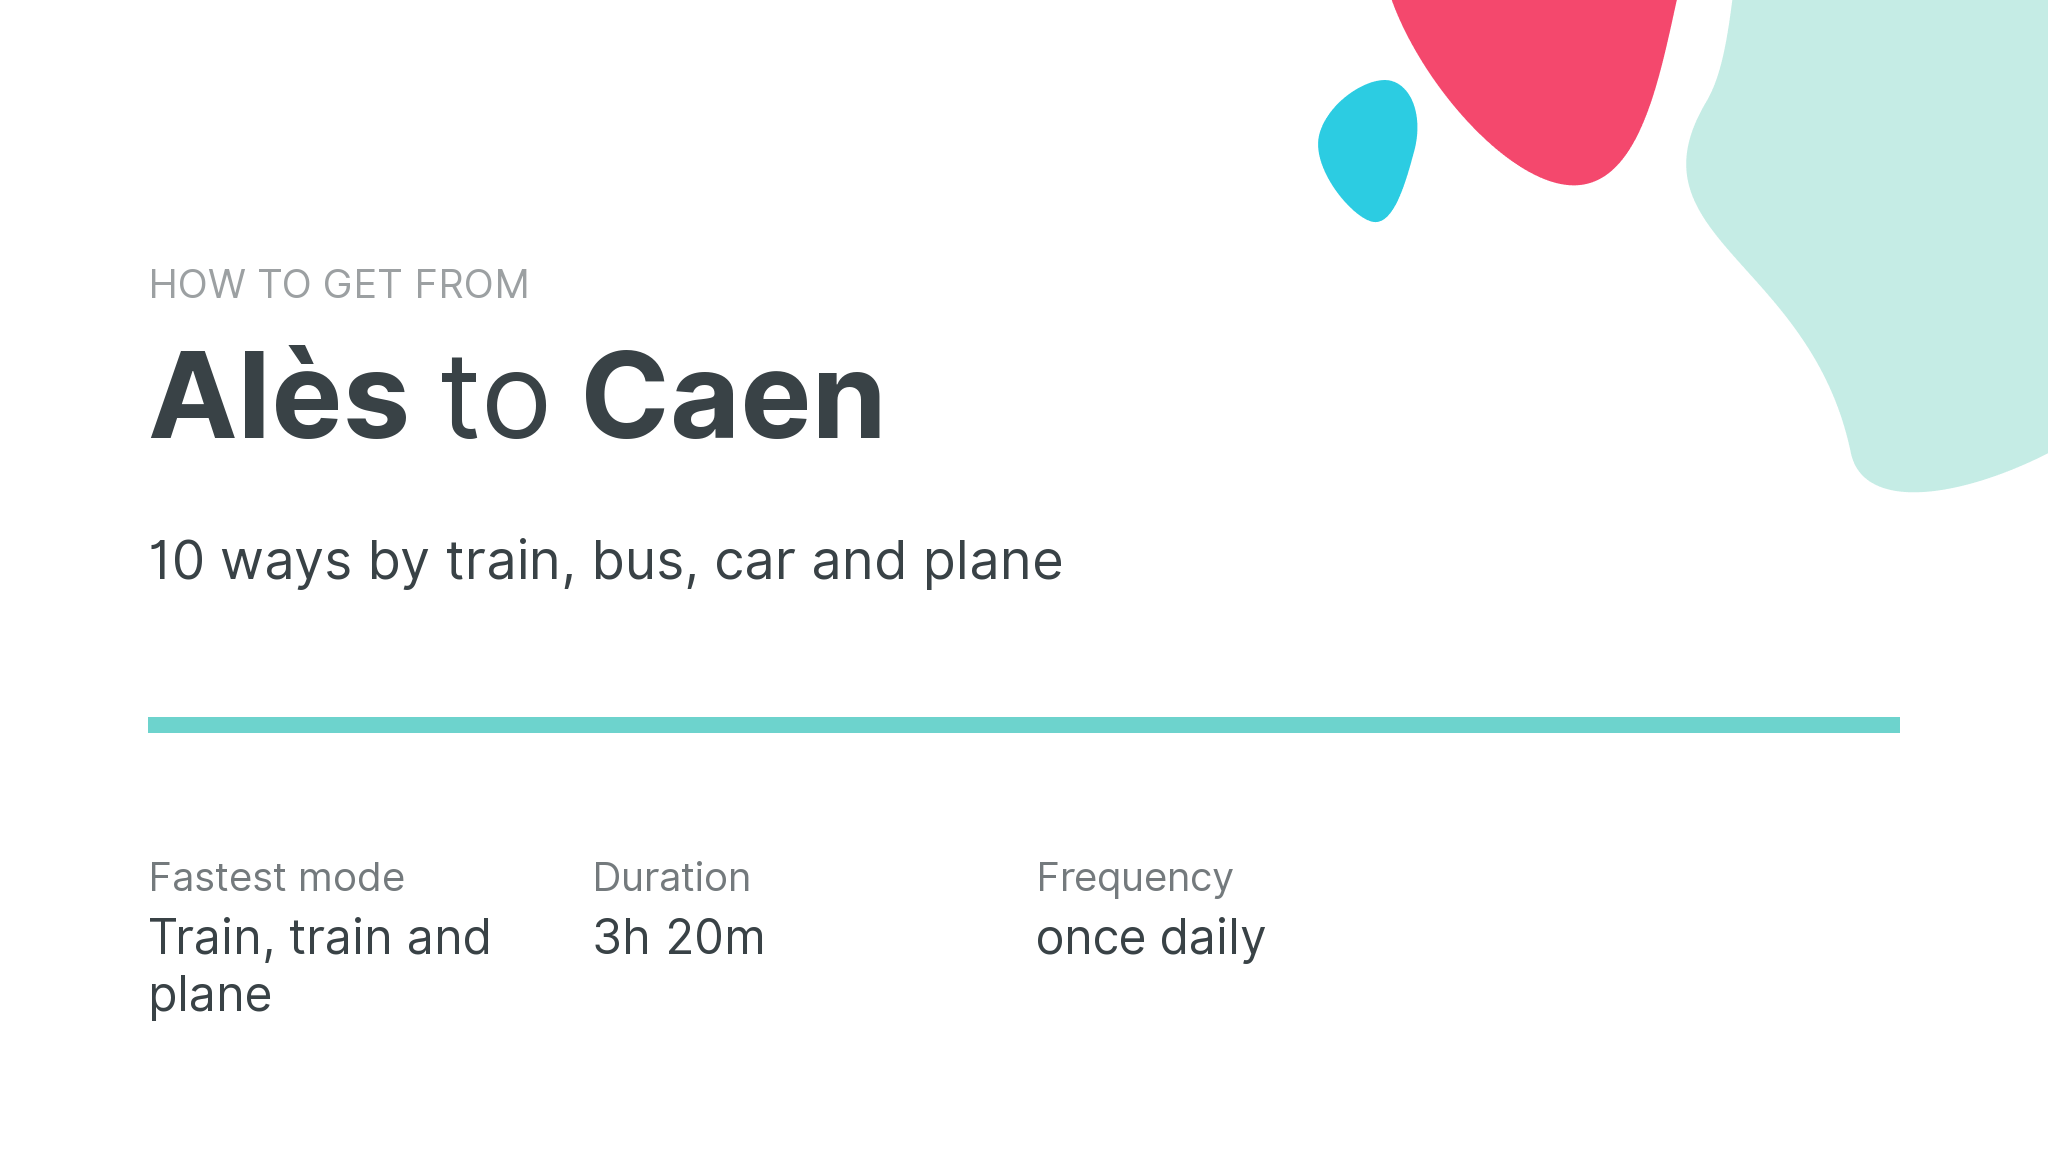 How do I get from Alès to Caen